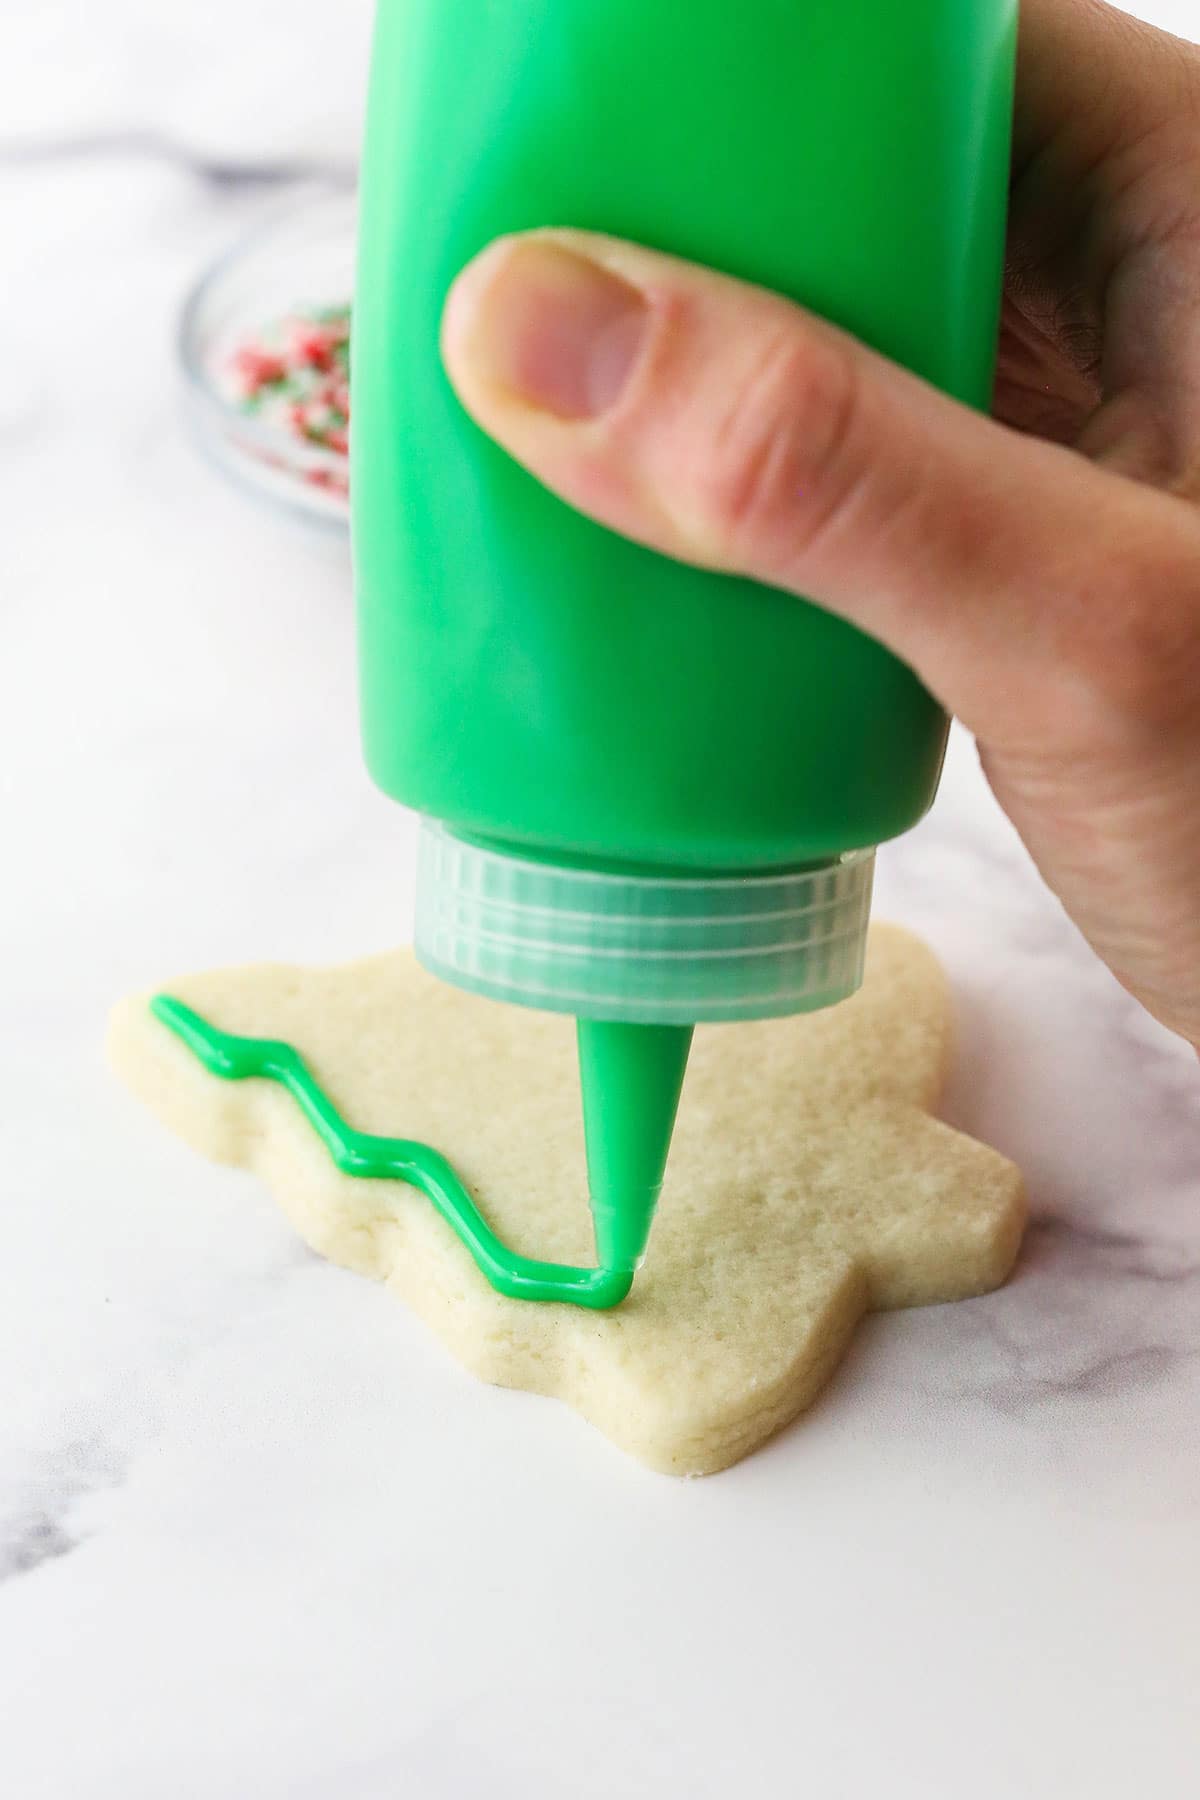 Green icing being added to a small sugar cookie shaped like a Christmas tree